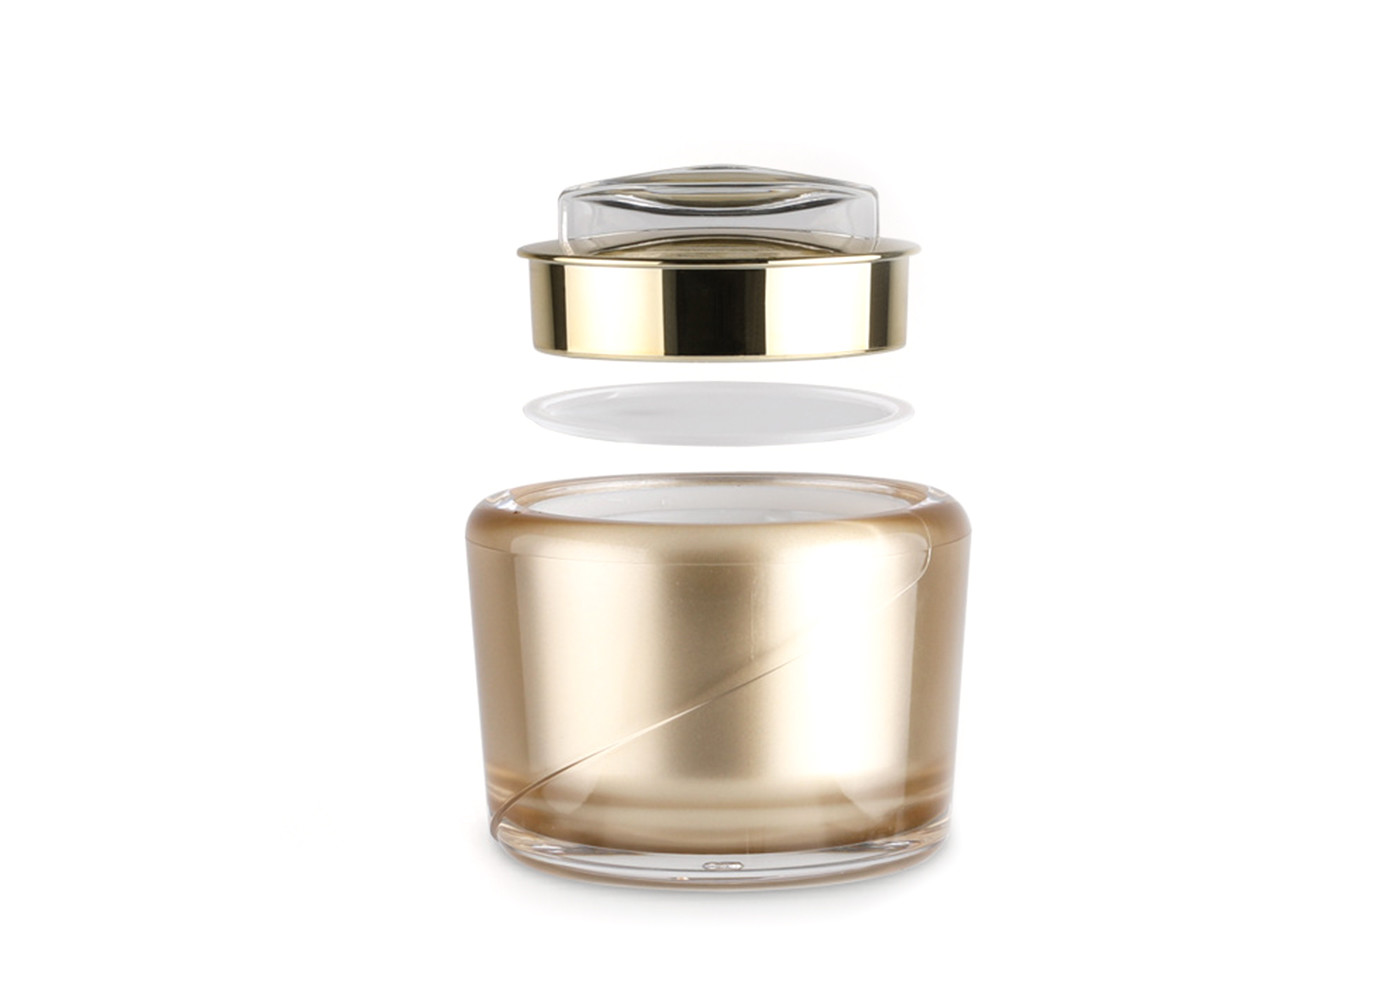  Luxury Golden Acrylic Jars For Cosmetics , 30g Cream Jars Cosmetic Packaging Manufactures